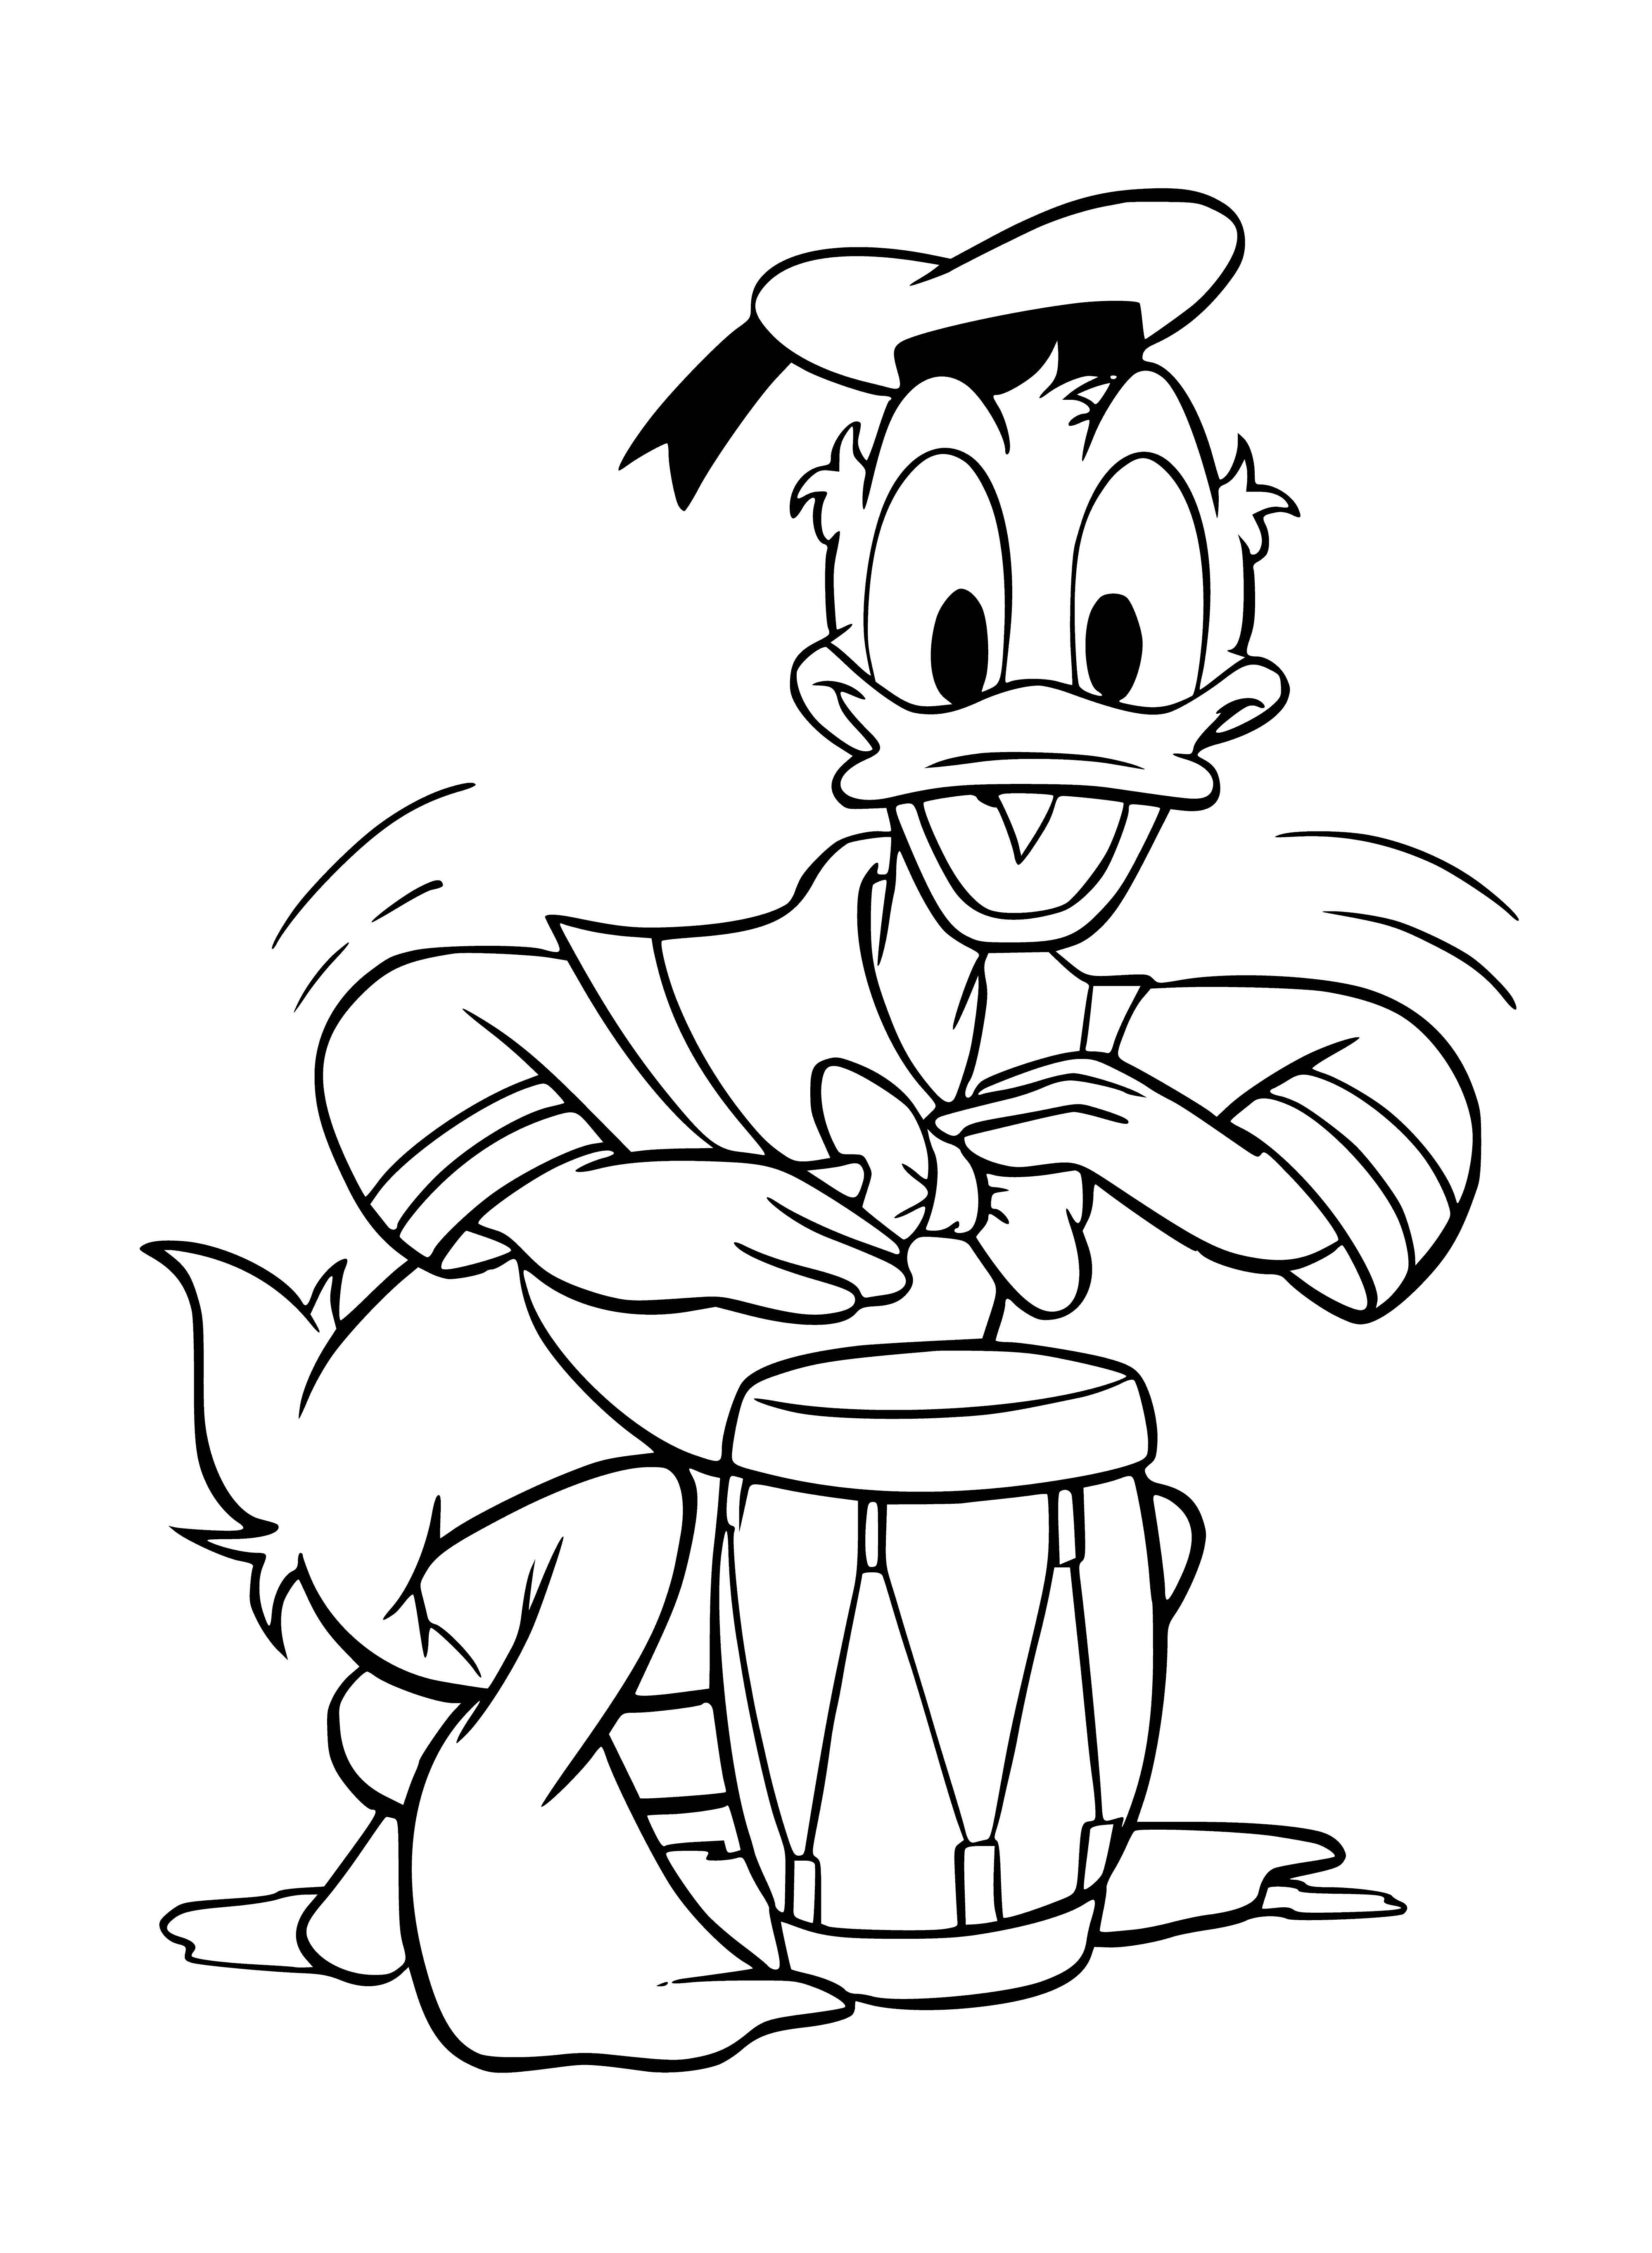 coloring page: Three singing mice; one plays drum, one holds mic, one plays guitar.